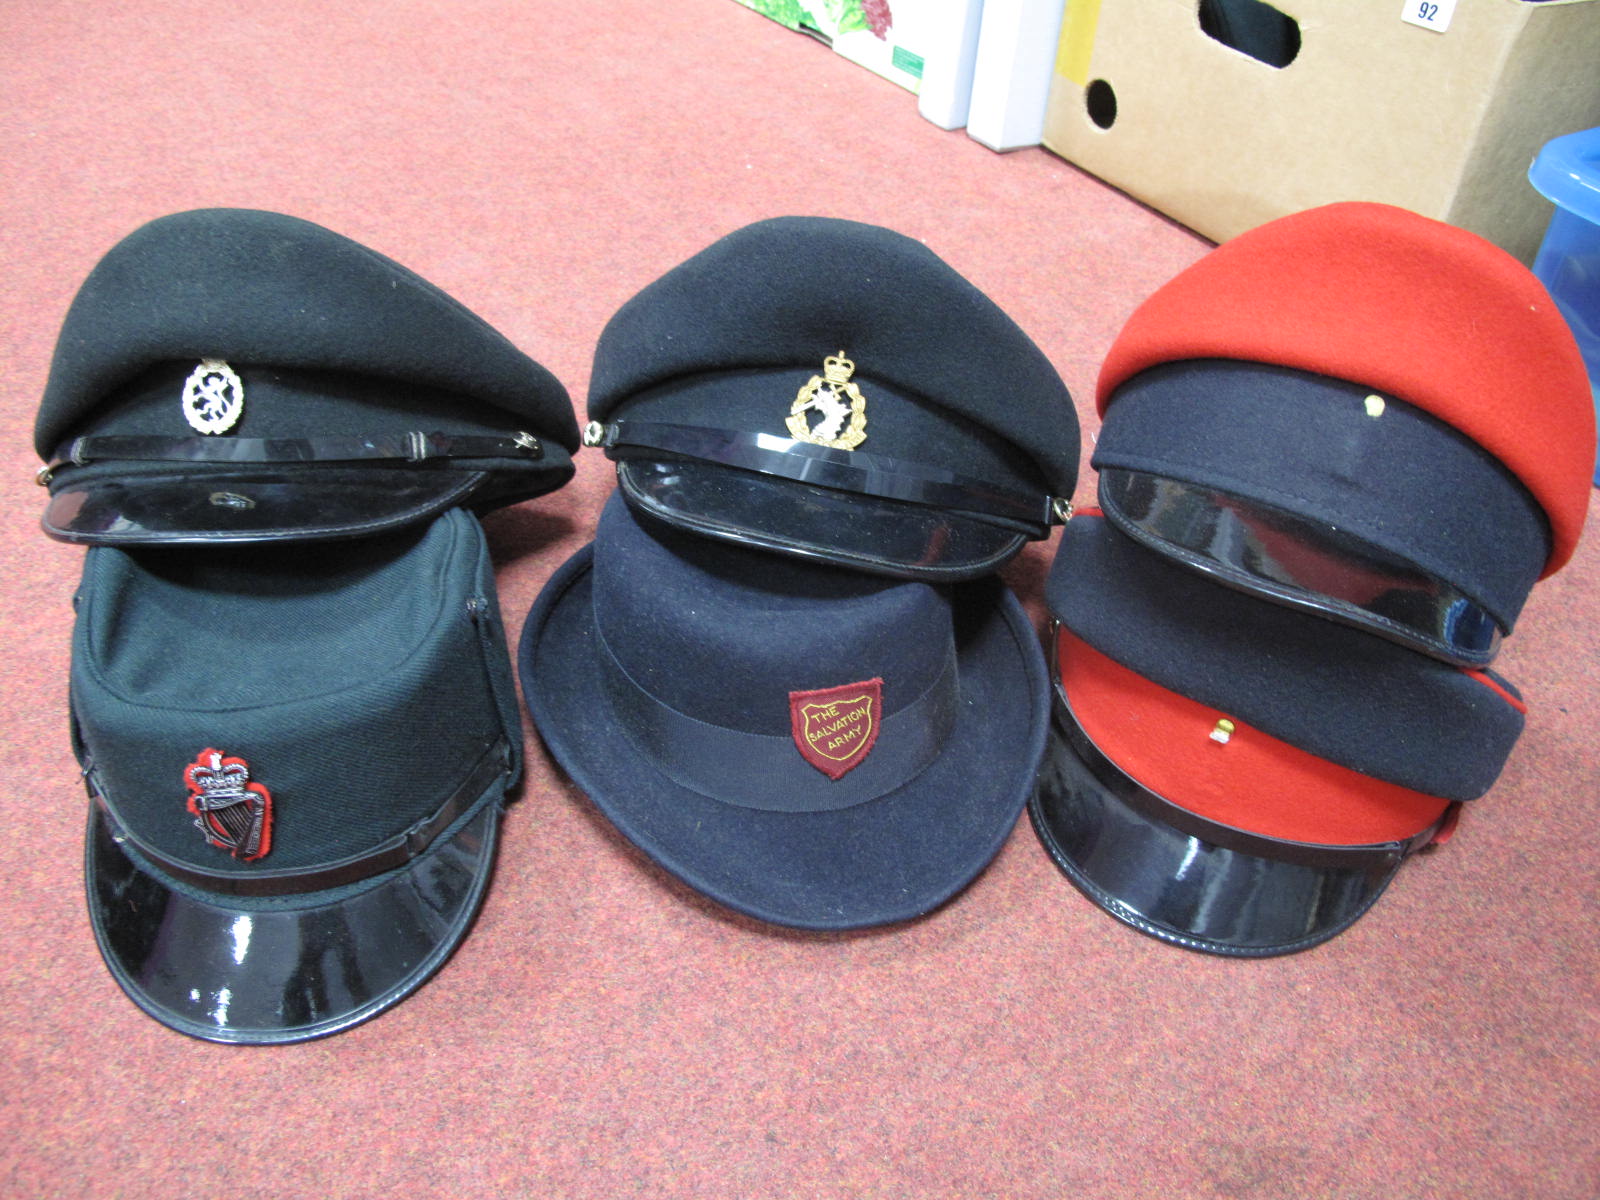 Five Late XX Century Female Military Caps and One Salvation Army Cap, R.E.M.E noted.